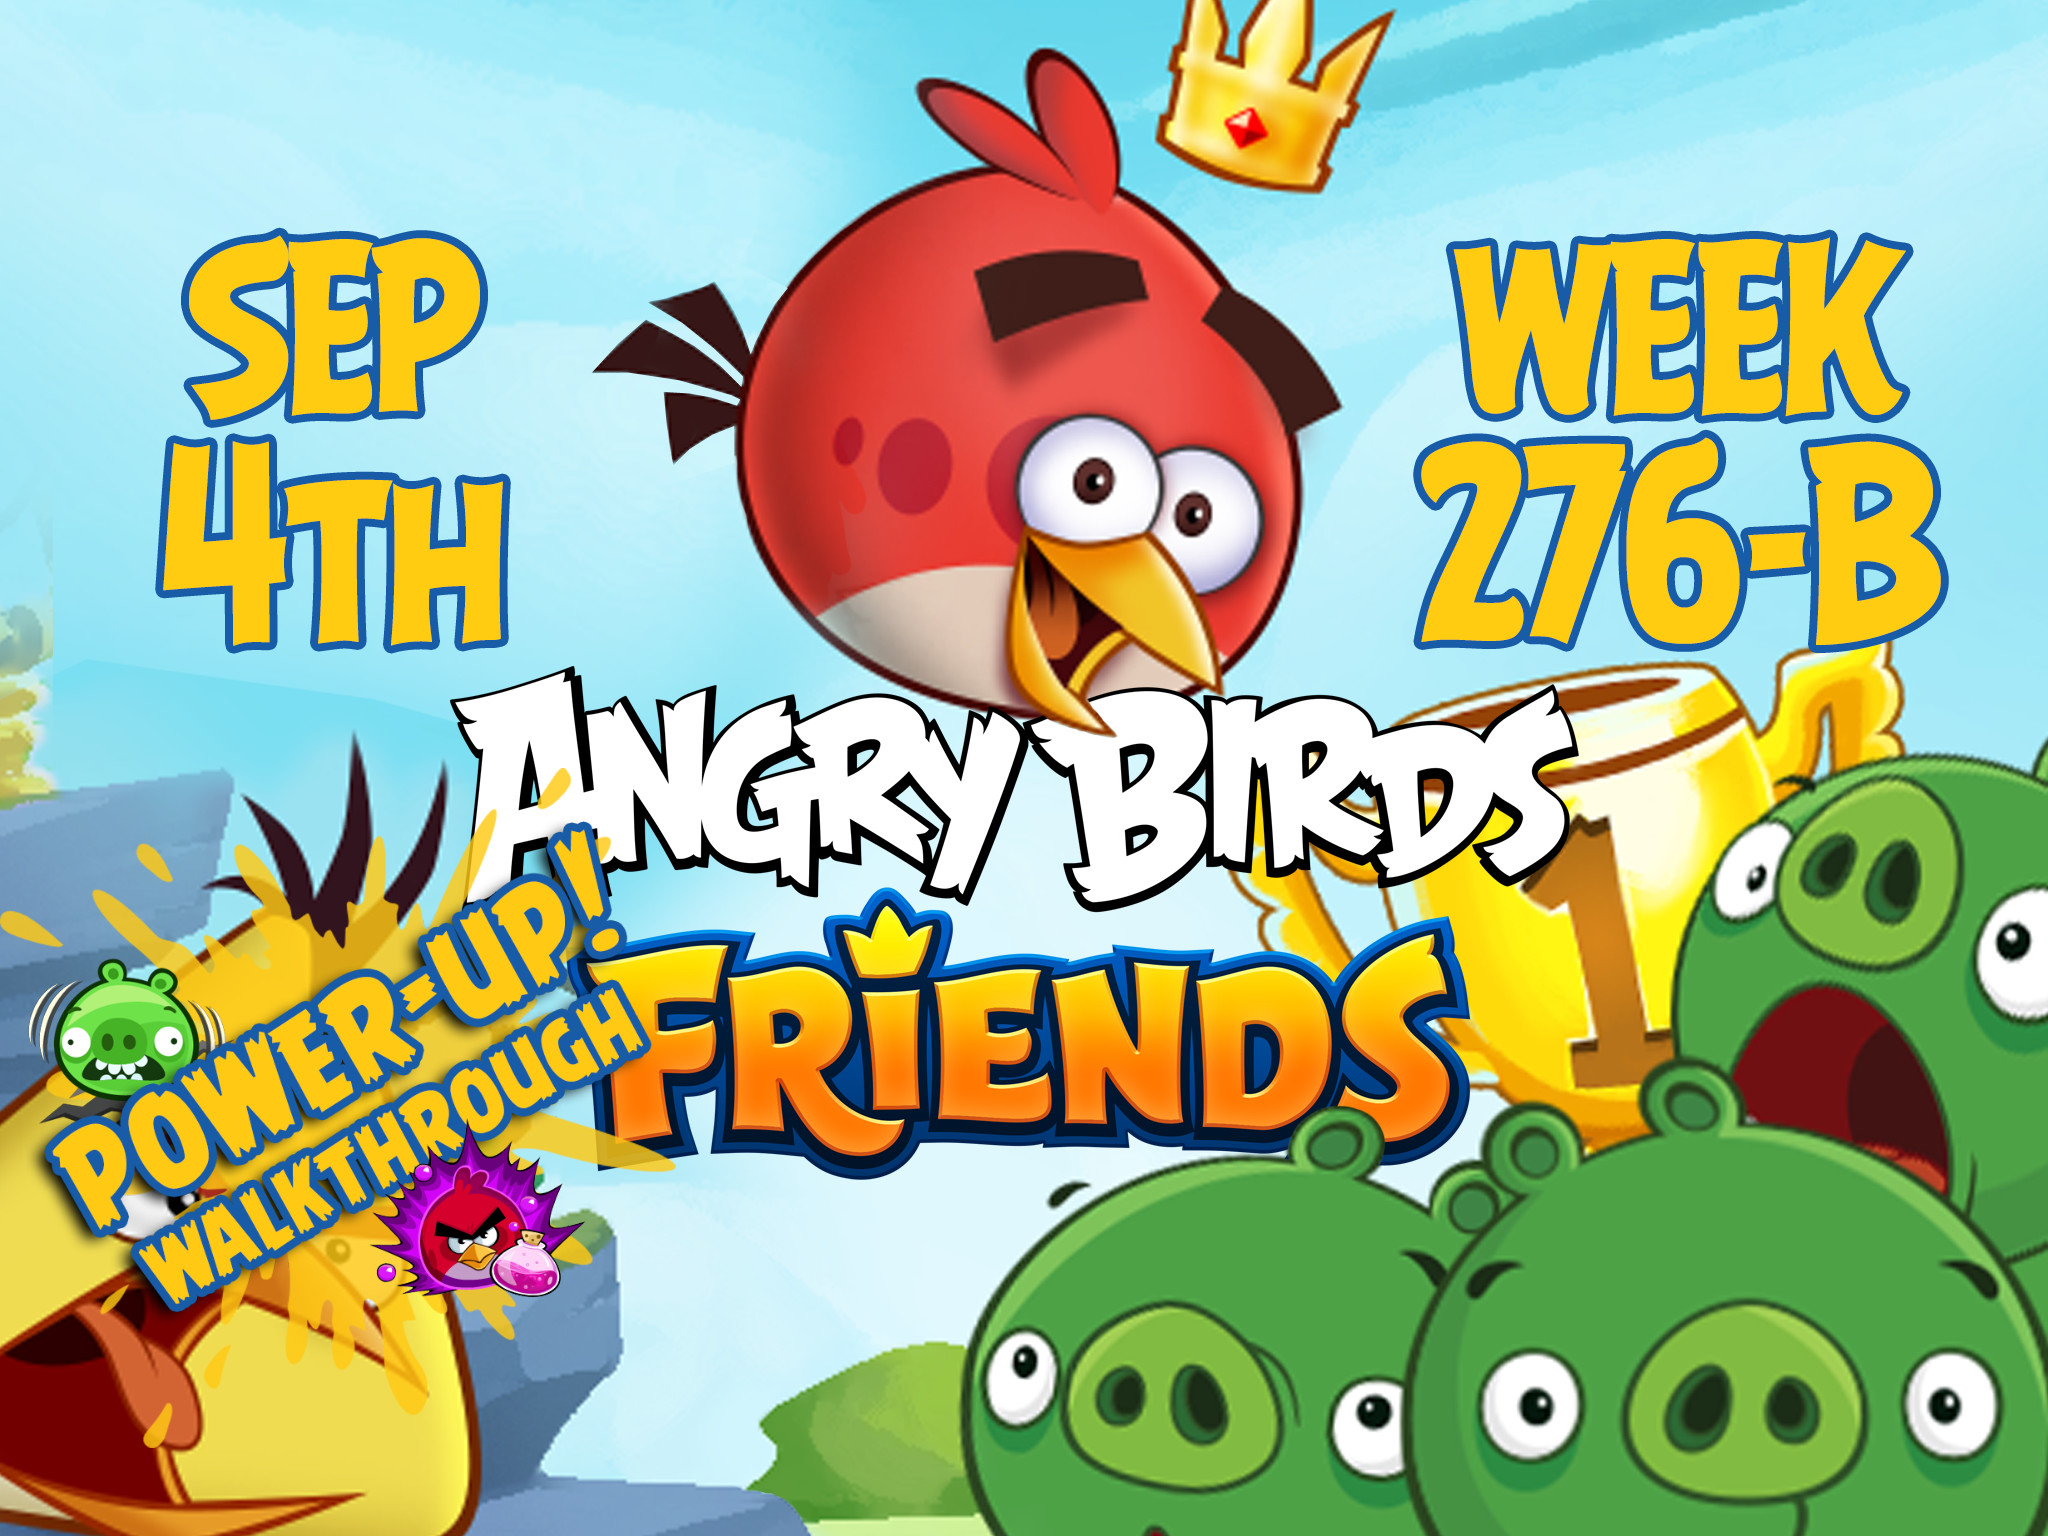 Angry Birds Friends Tournament Week 276-B Feature Image PU